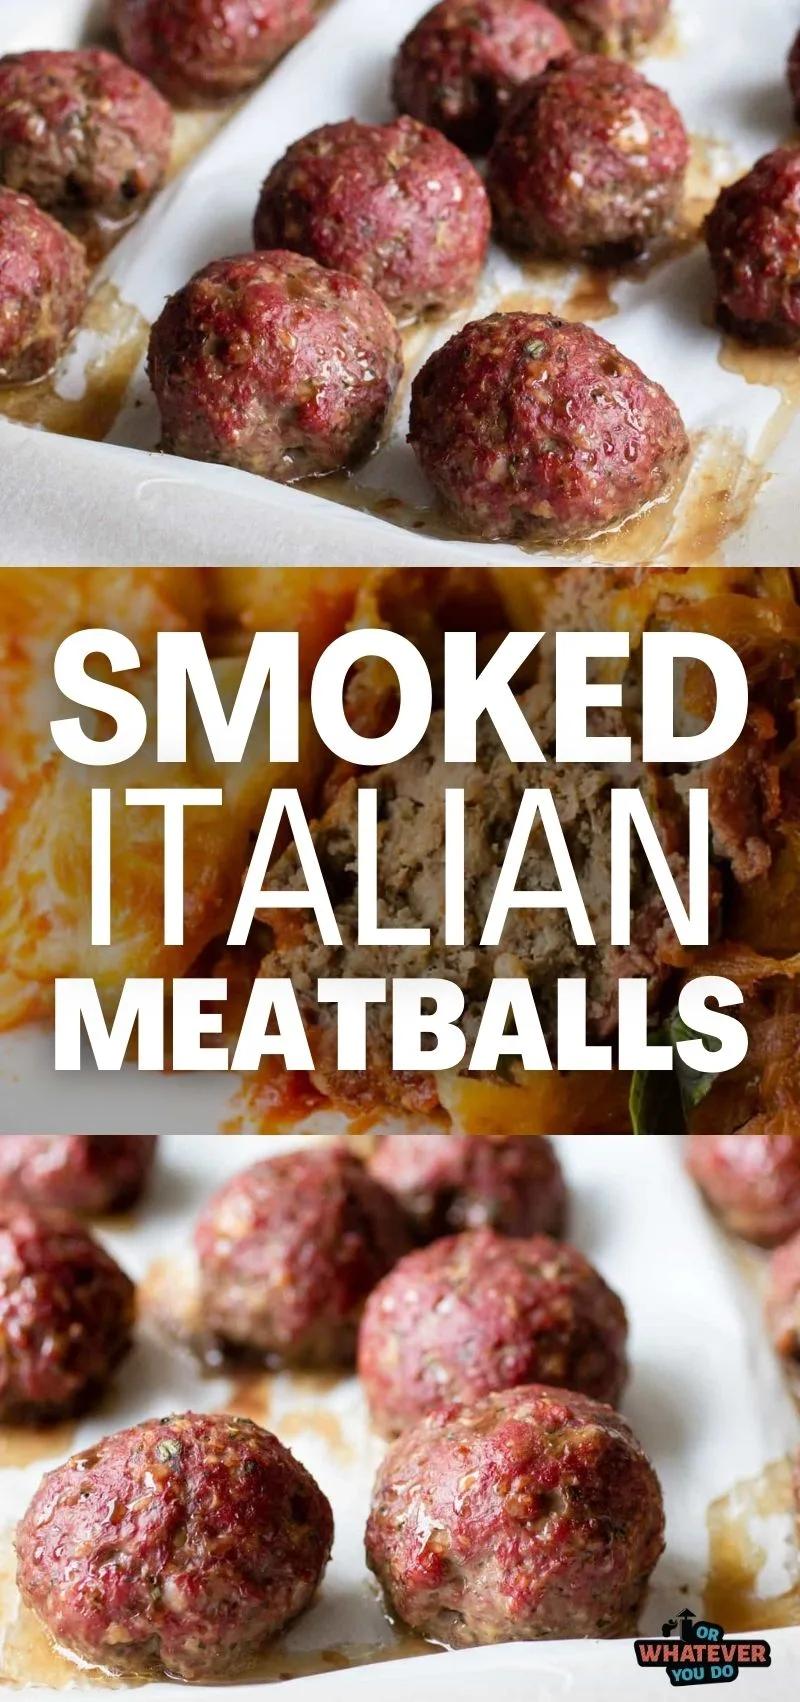 smoked italian meatballs - What are traditional Italian meatballs made of